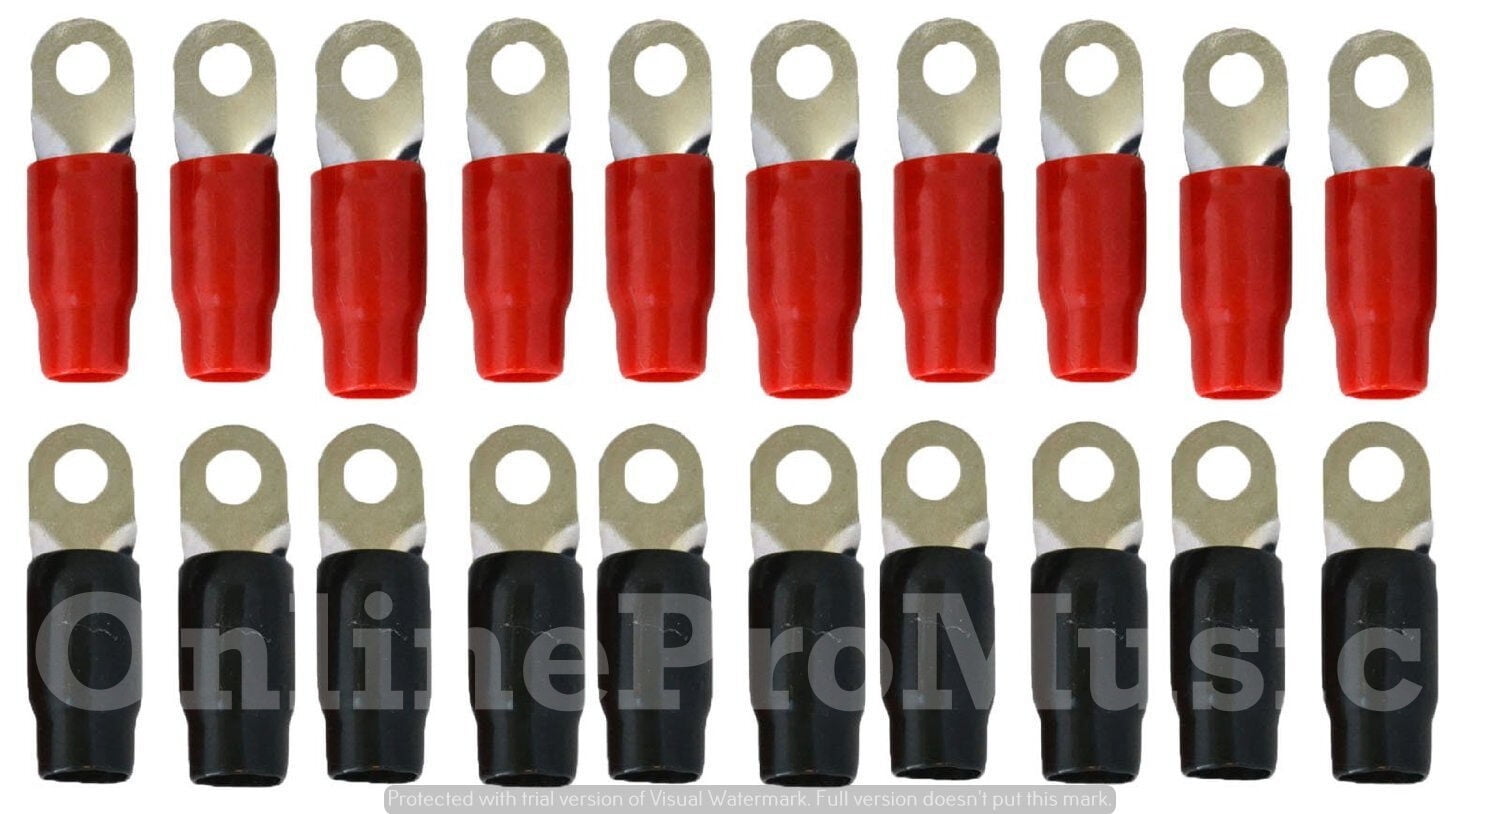 0 Gauge Gold Ring Terminal 40 Pack 1/0 AWG Wire Crimp Red Black Boots 5/16" Stud 